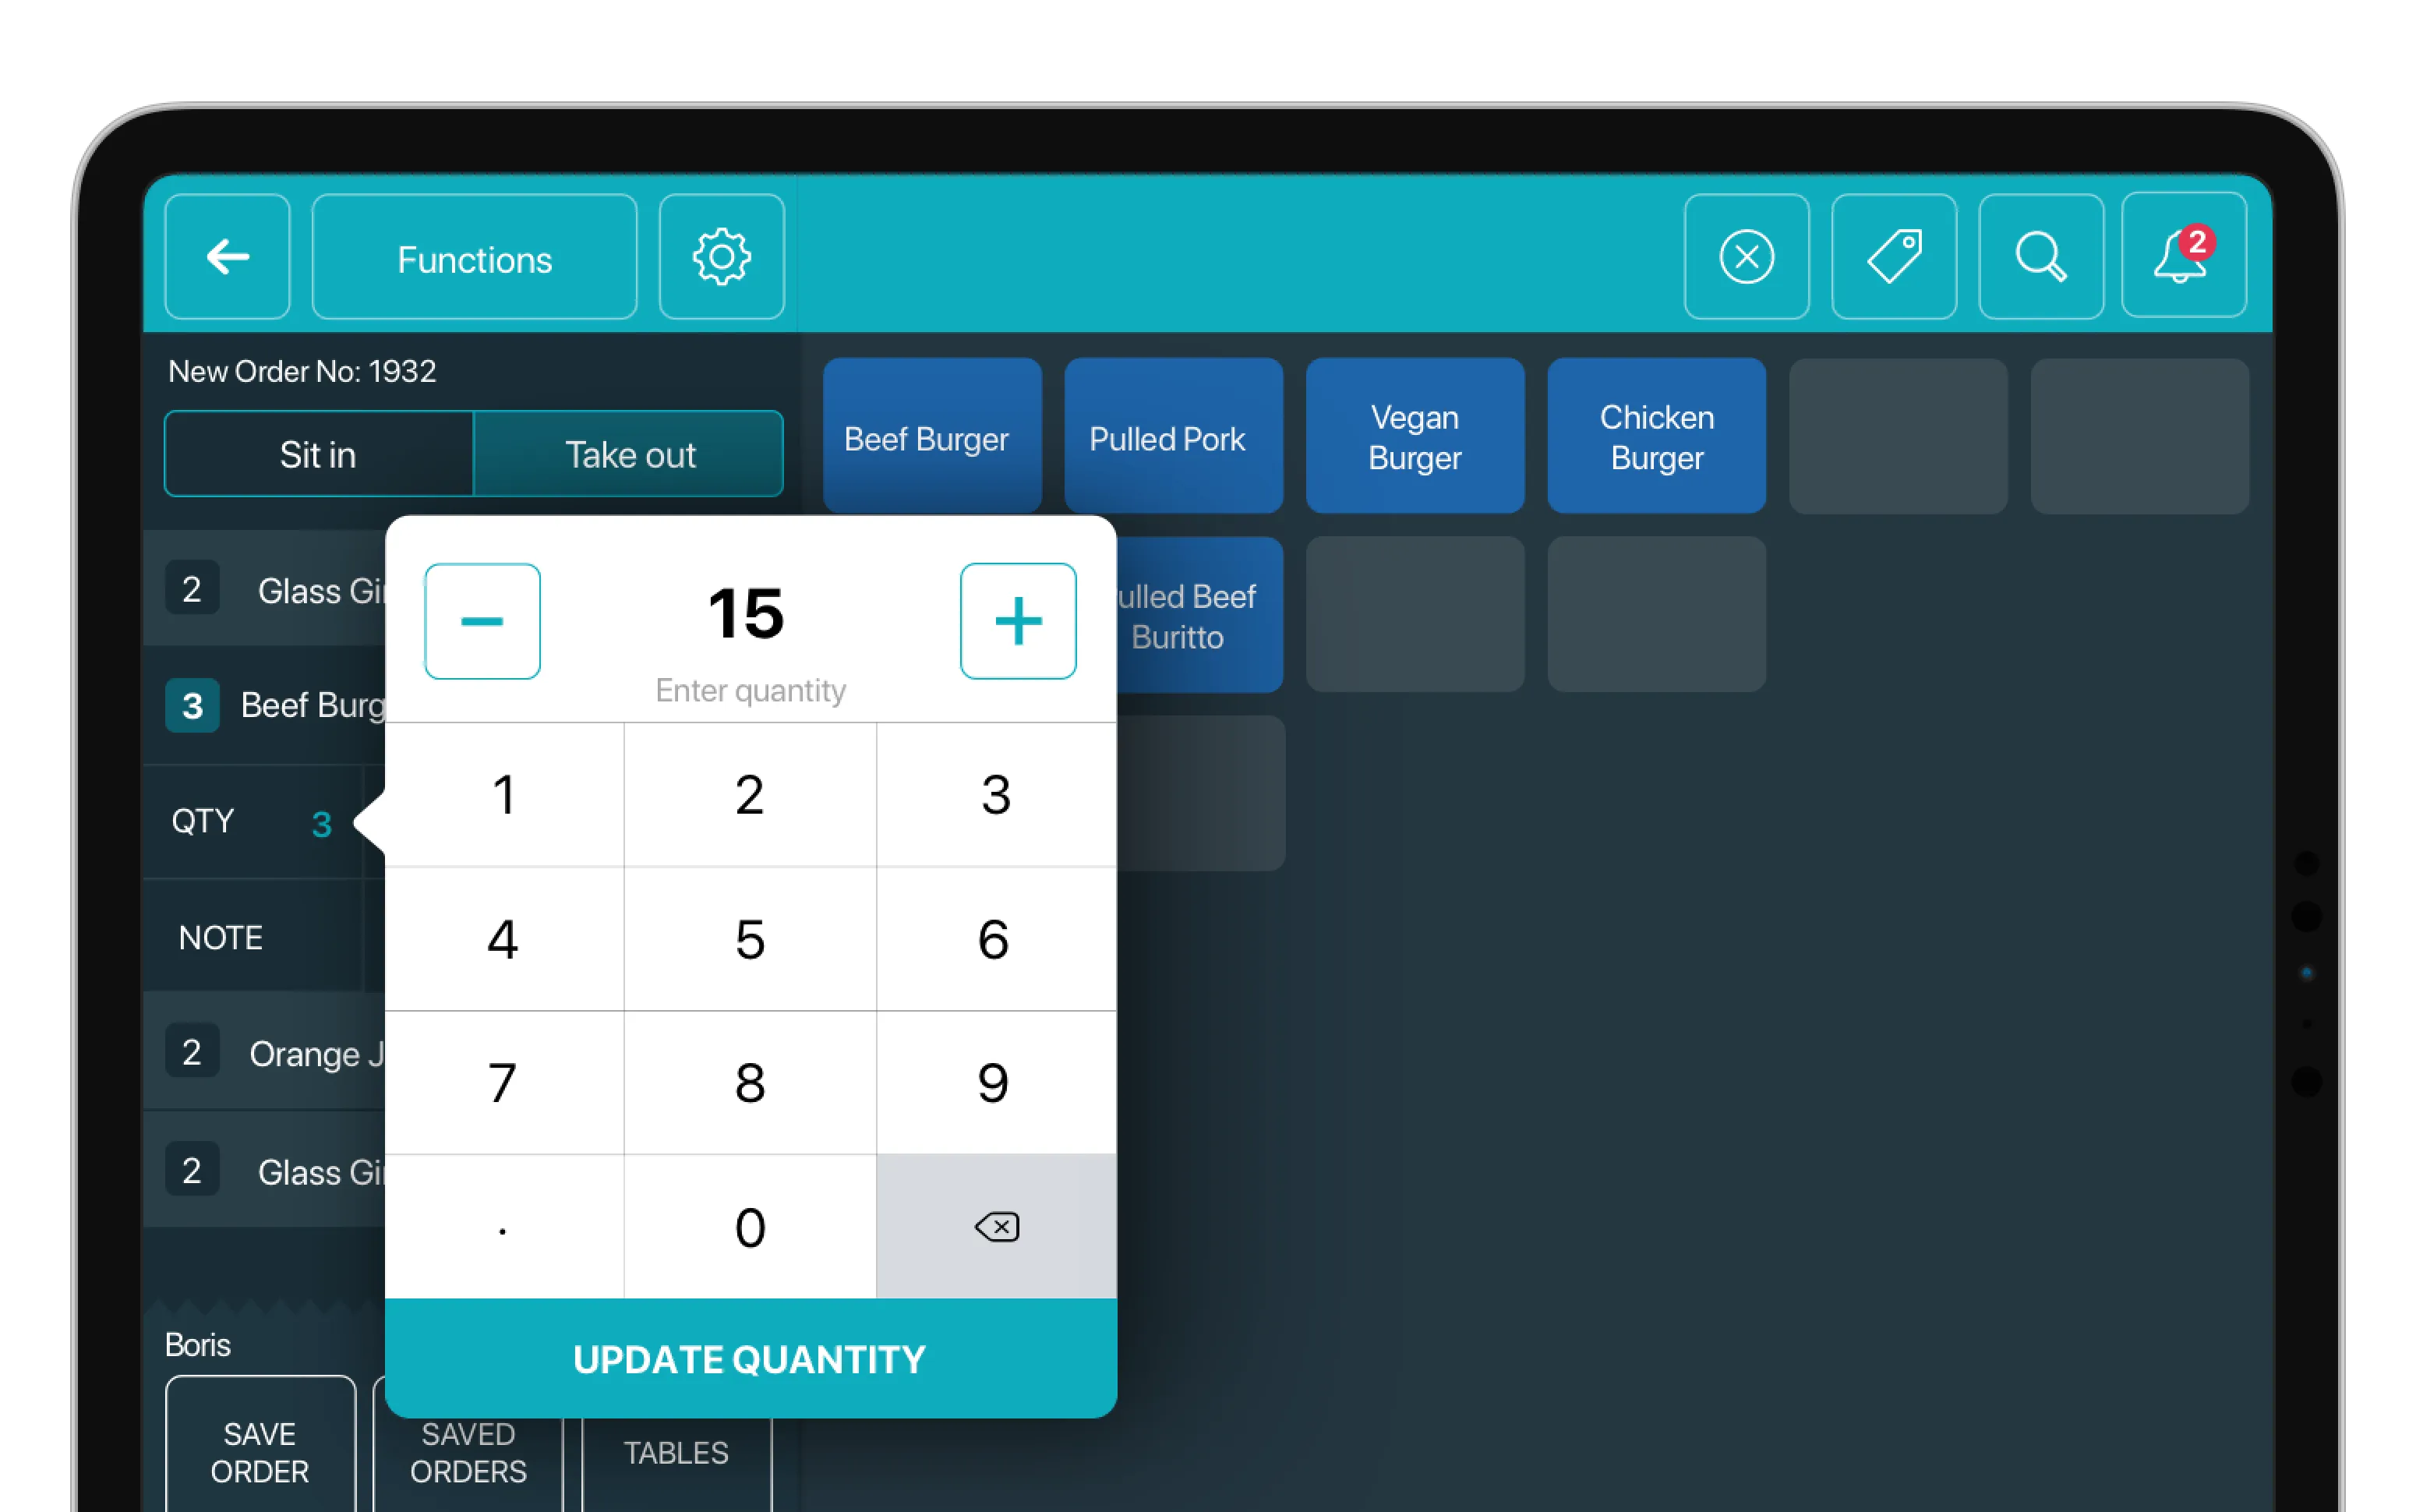 iPad-based point of sale app designs presented in an iPad mockup
